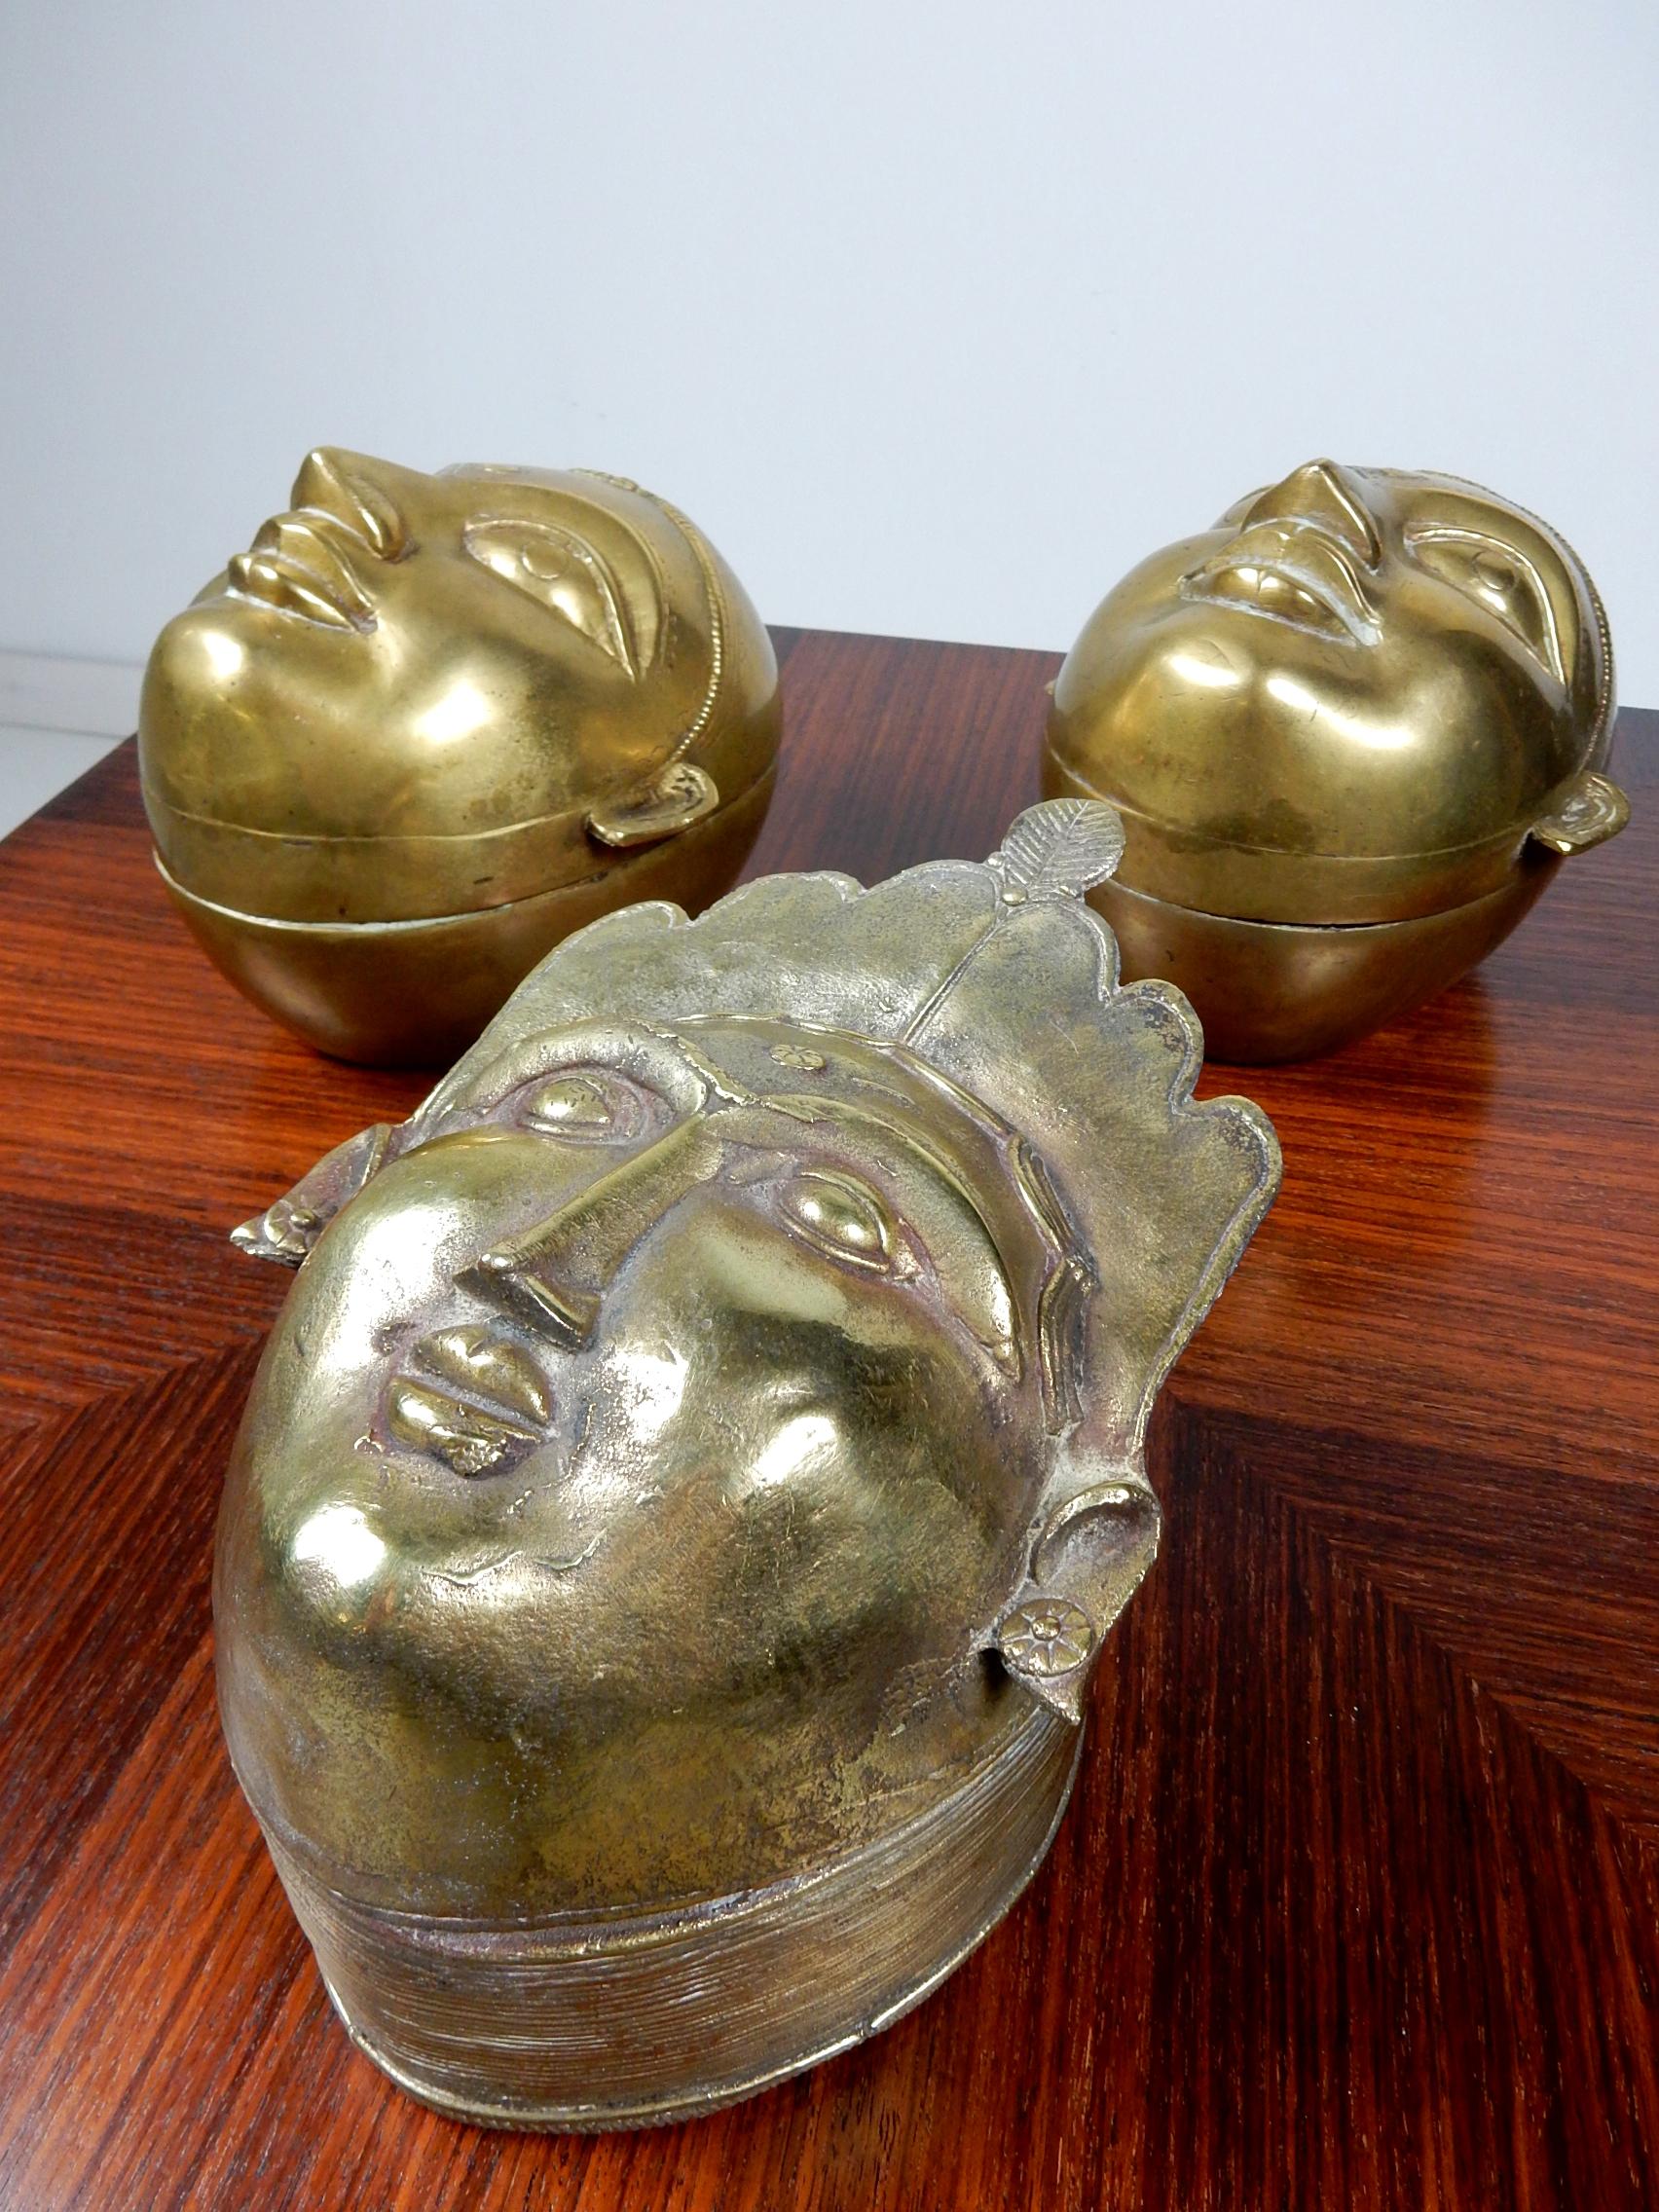 Set of three antique Hindu Gauri brass sculpture decorative hinged boxes.
These are large pieces measuring 8 inches tall x 6 inches wide.
Formed of solid brass with excellent detail.
Fantastic as coffee table decor.